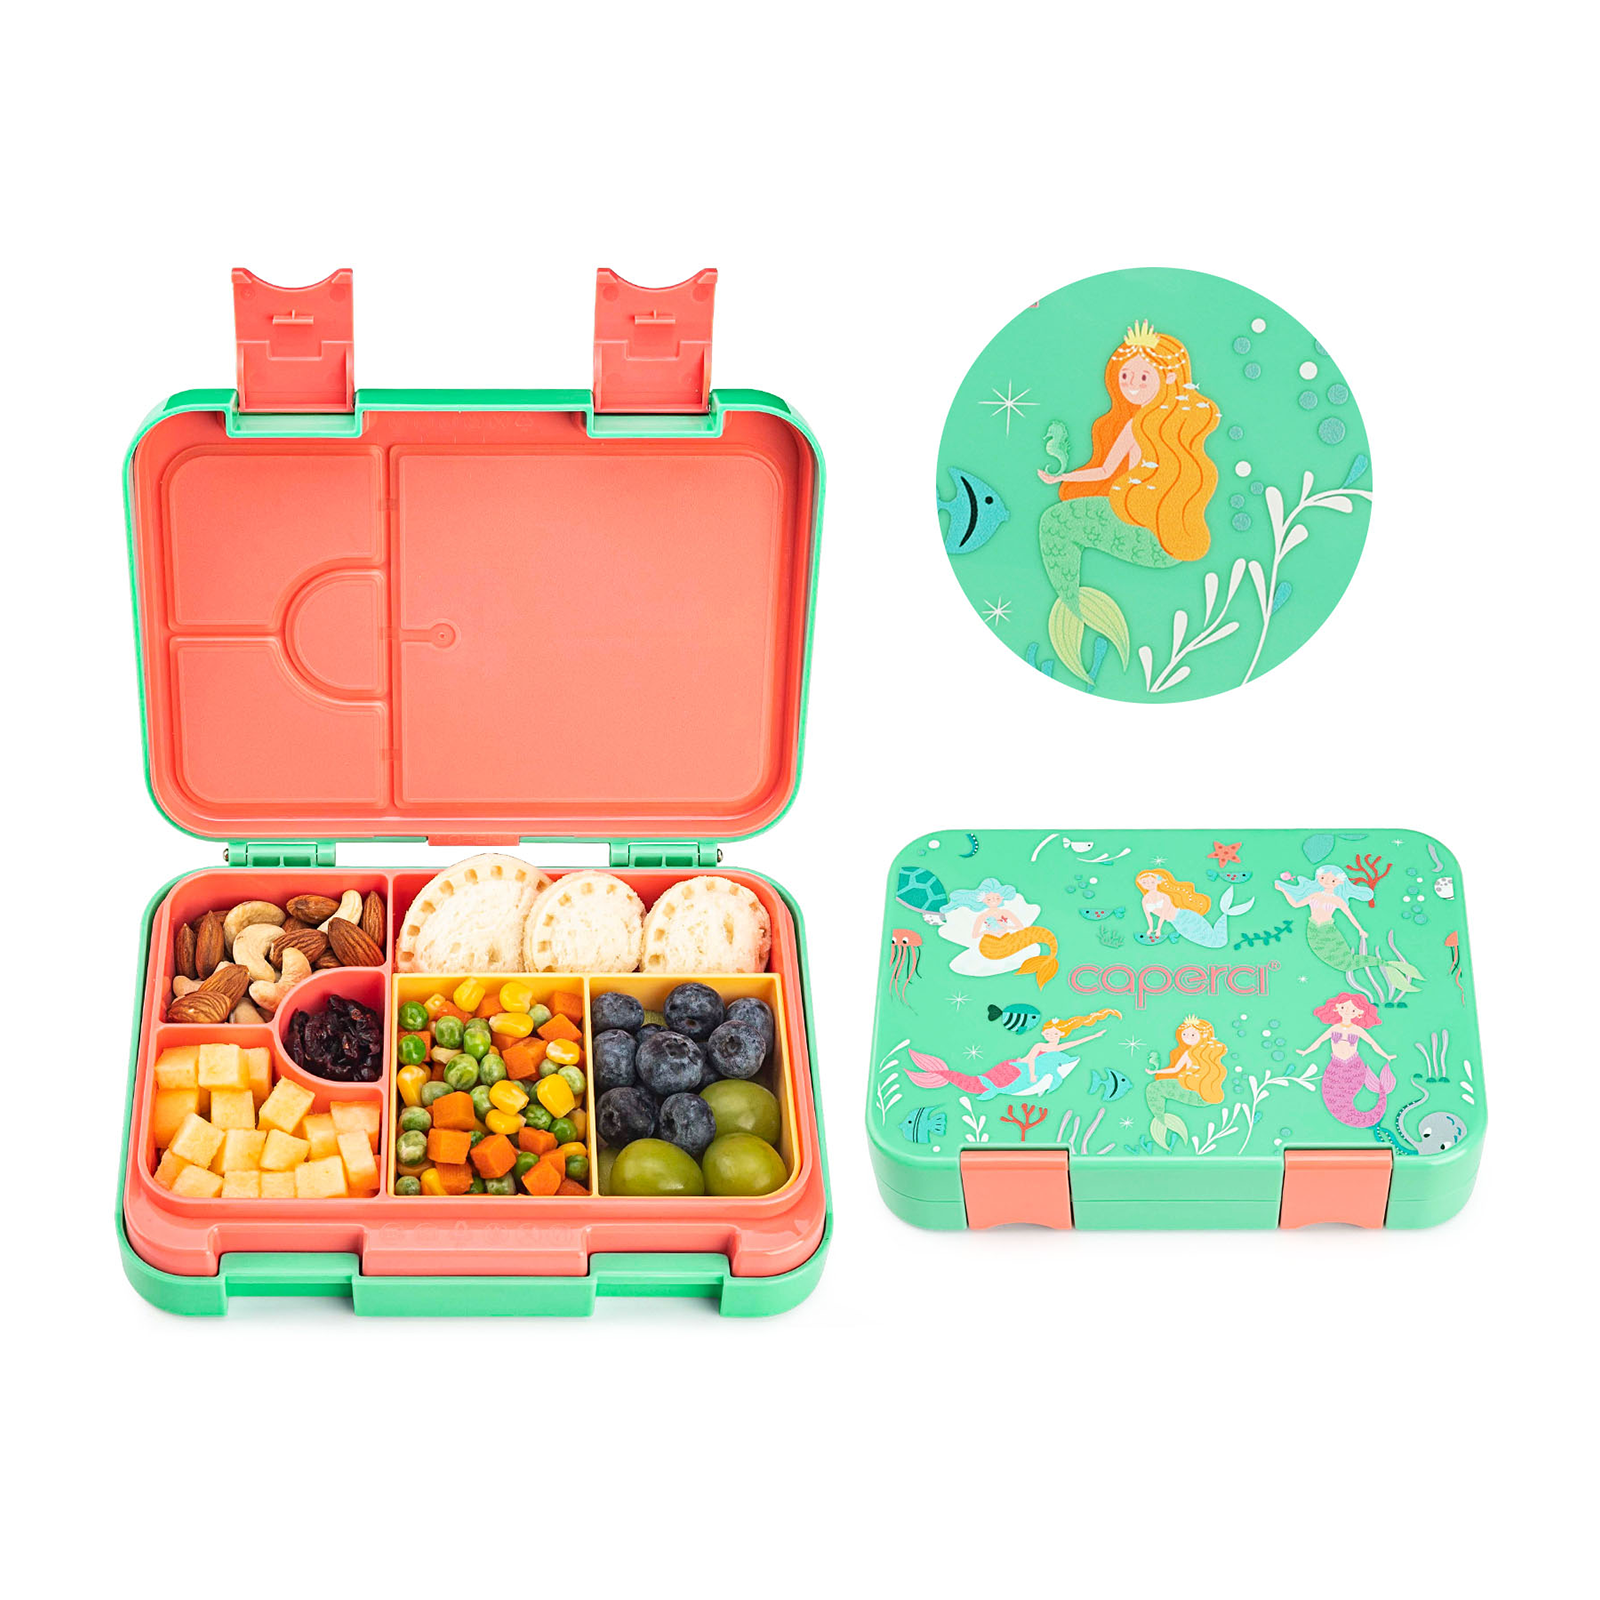 1pc Cartoon Dinosaur Shaped Bento Box For Household Meal Portioning,  Refrigerating, Freezing And Fresh Keeping, Suitable For Office Workers And  Fruit Carrying Out